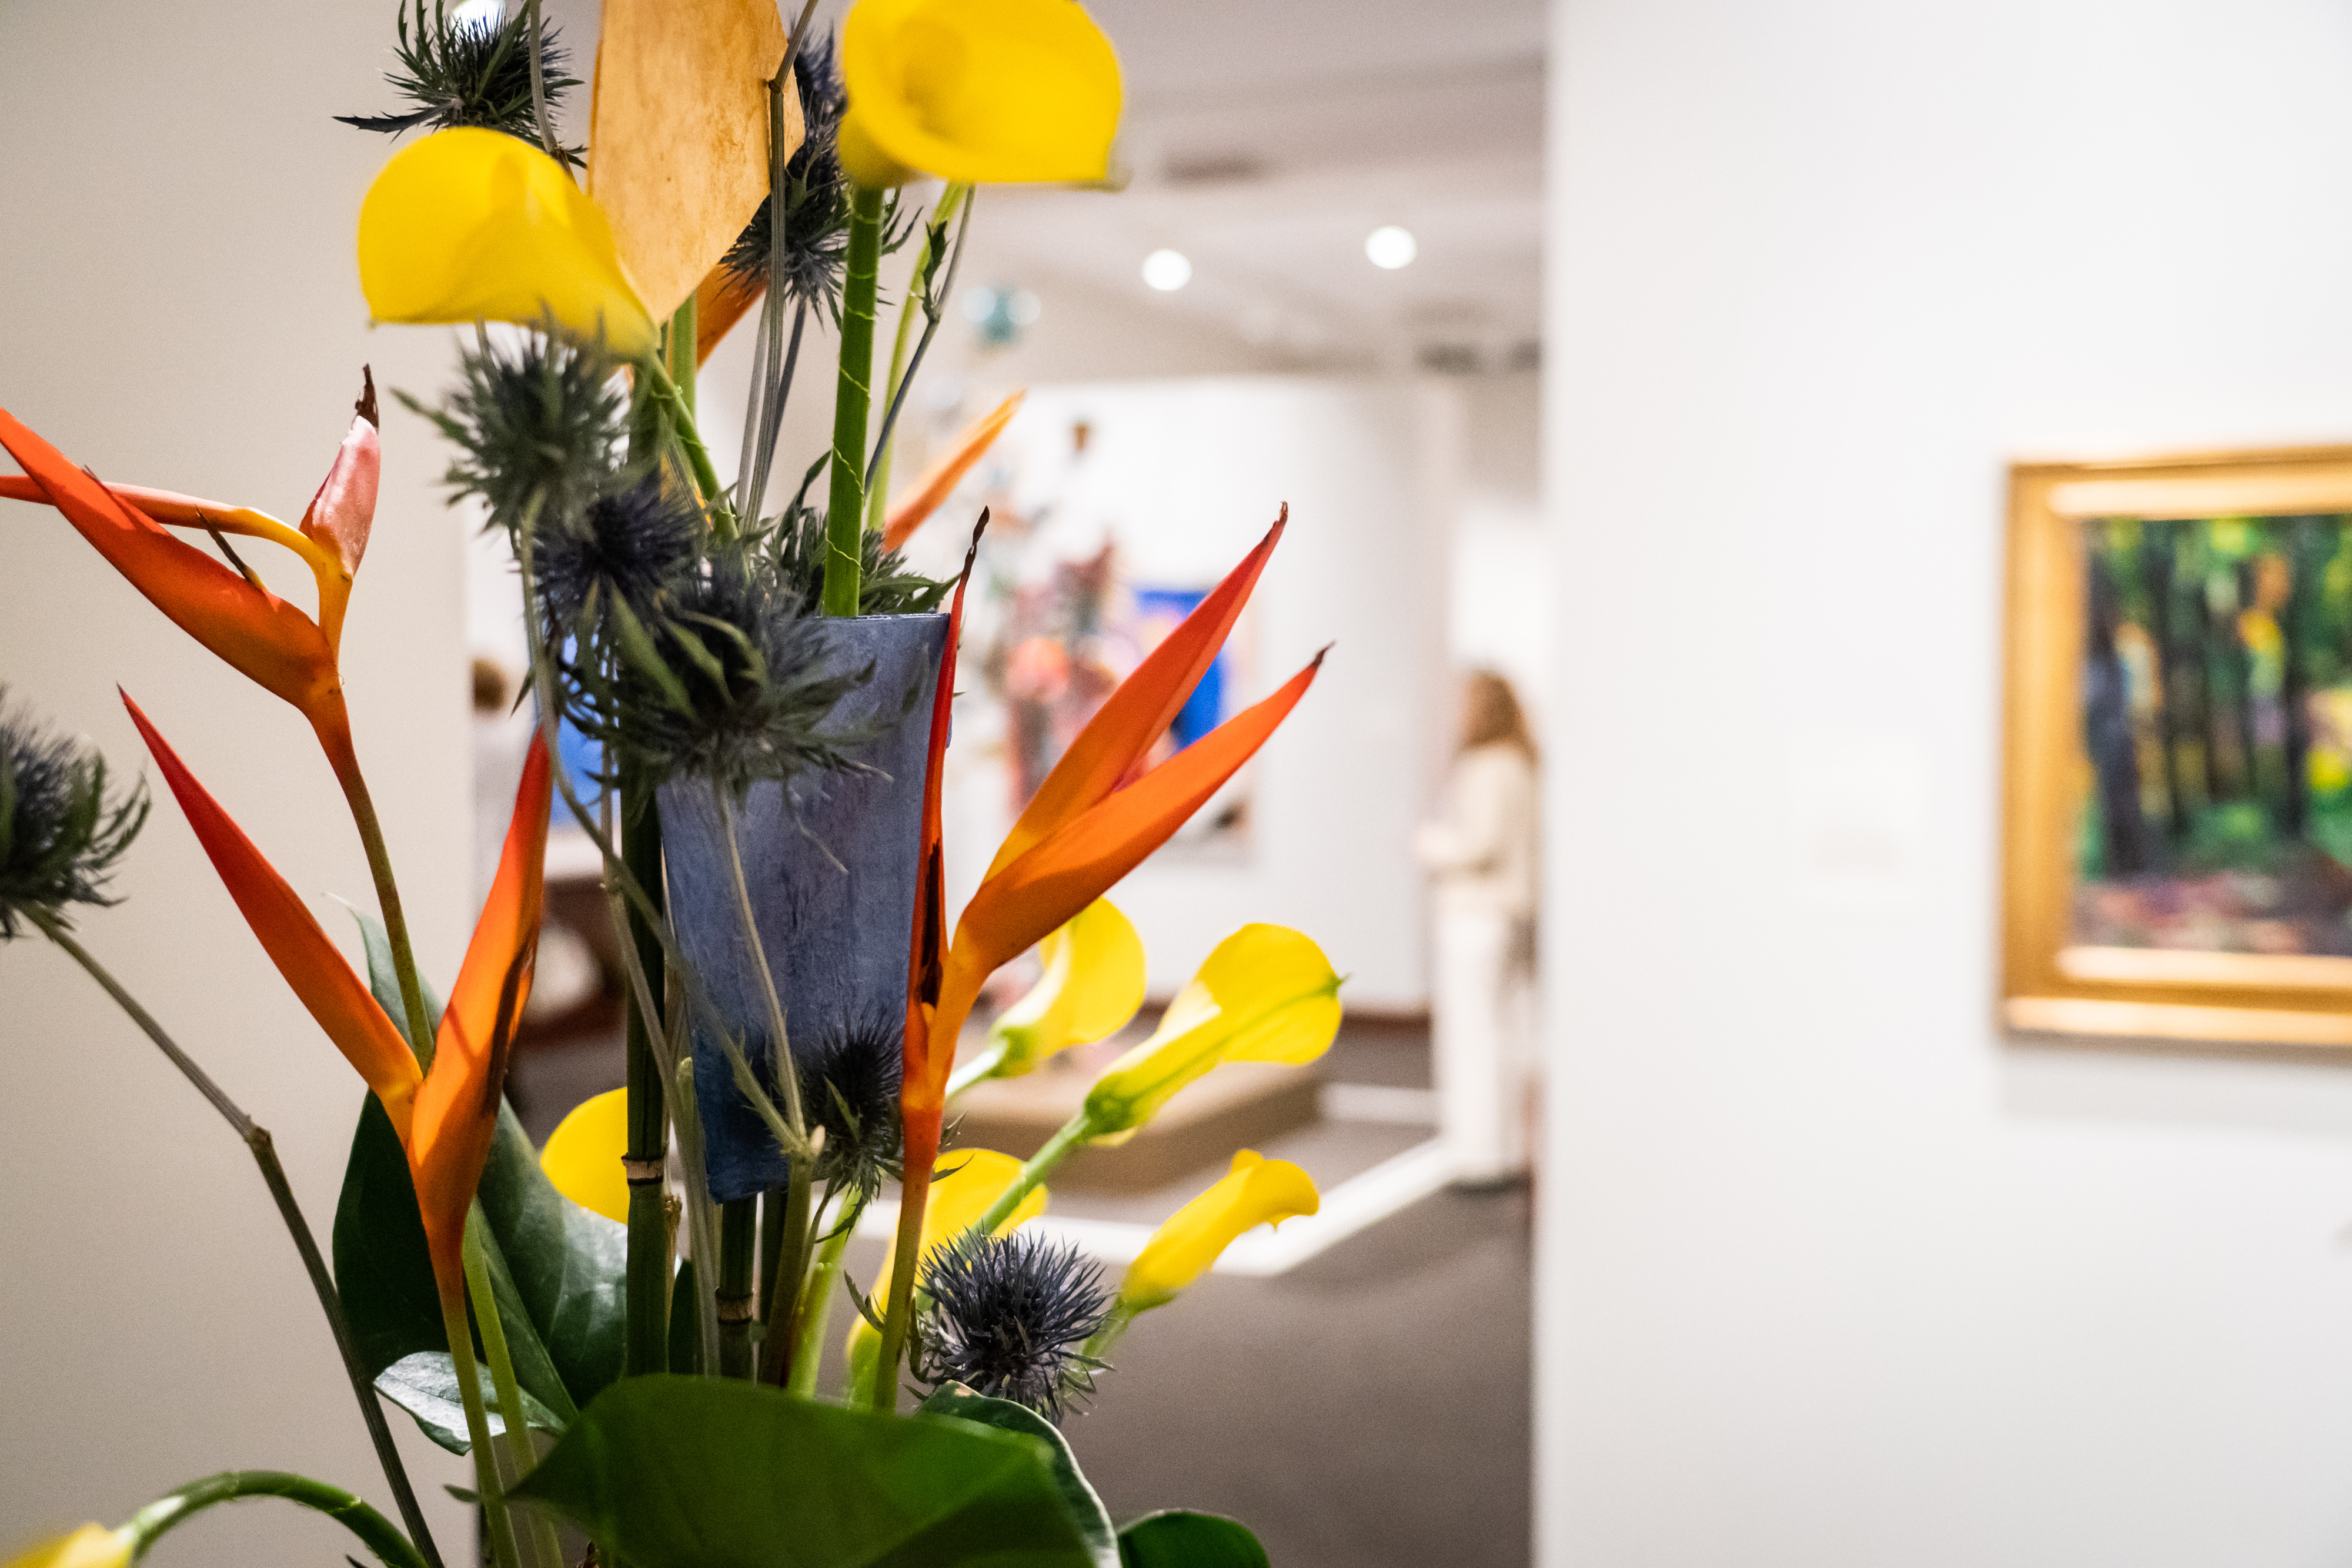 The camera is focused on a colorful floral arrangement in the MAM galleries. Further back and out of focus, a painting is hanging on the wall and a woman is looking at Nick Cave's sound suit.